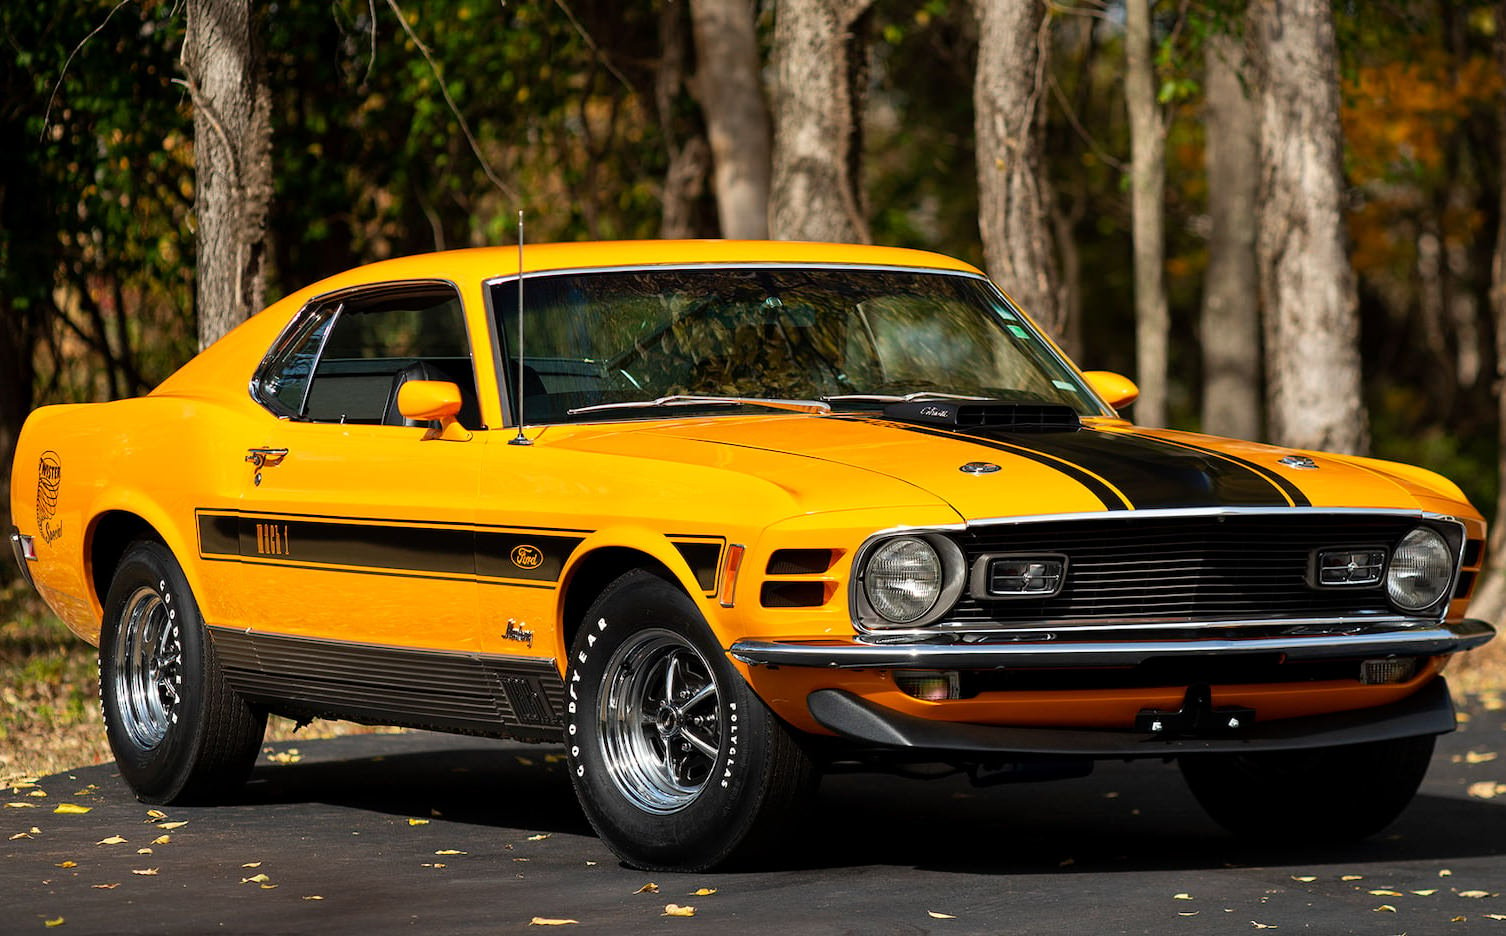 The Authentic 1970 Mustang Mach 1 “Tornado Particular” Take a look at Automobile Is For Sale